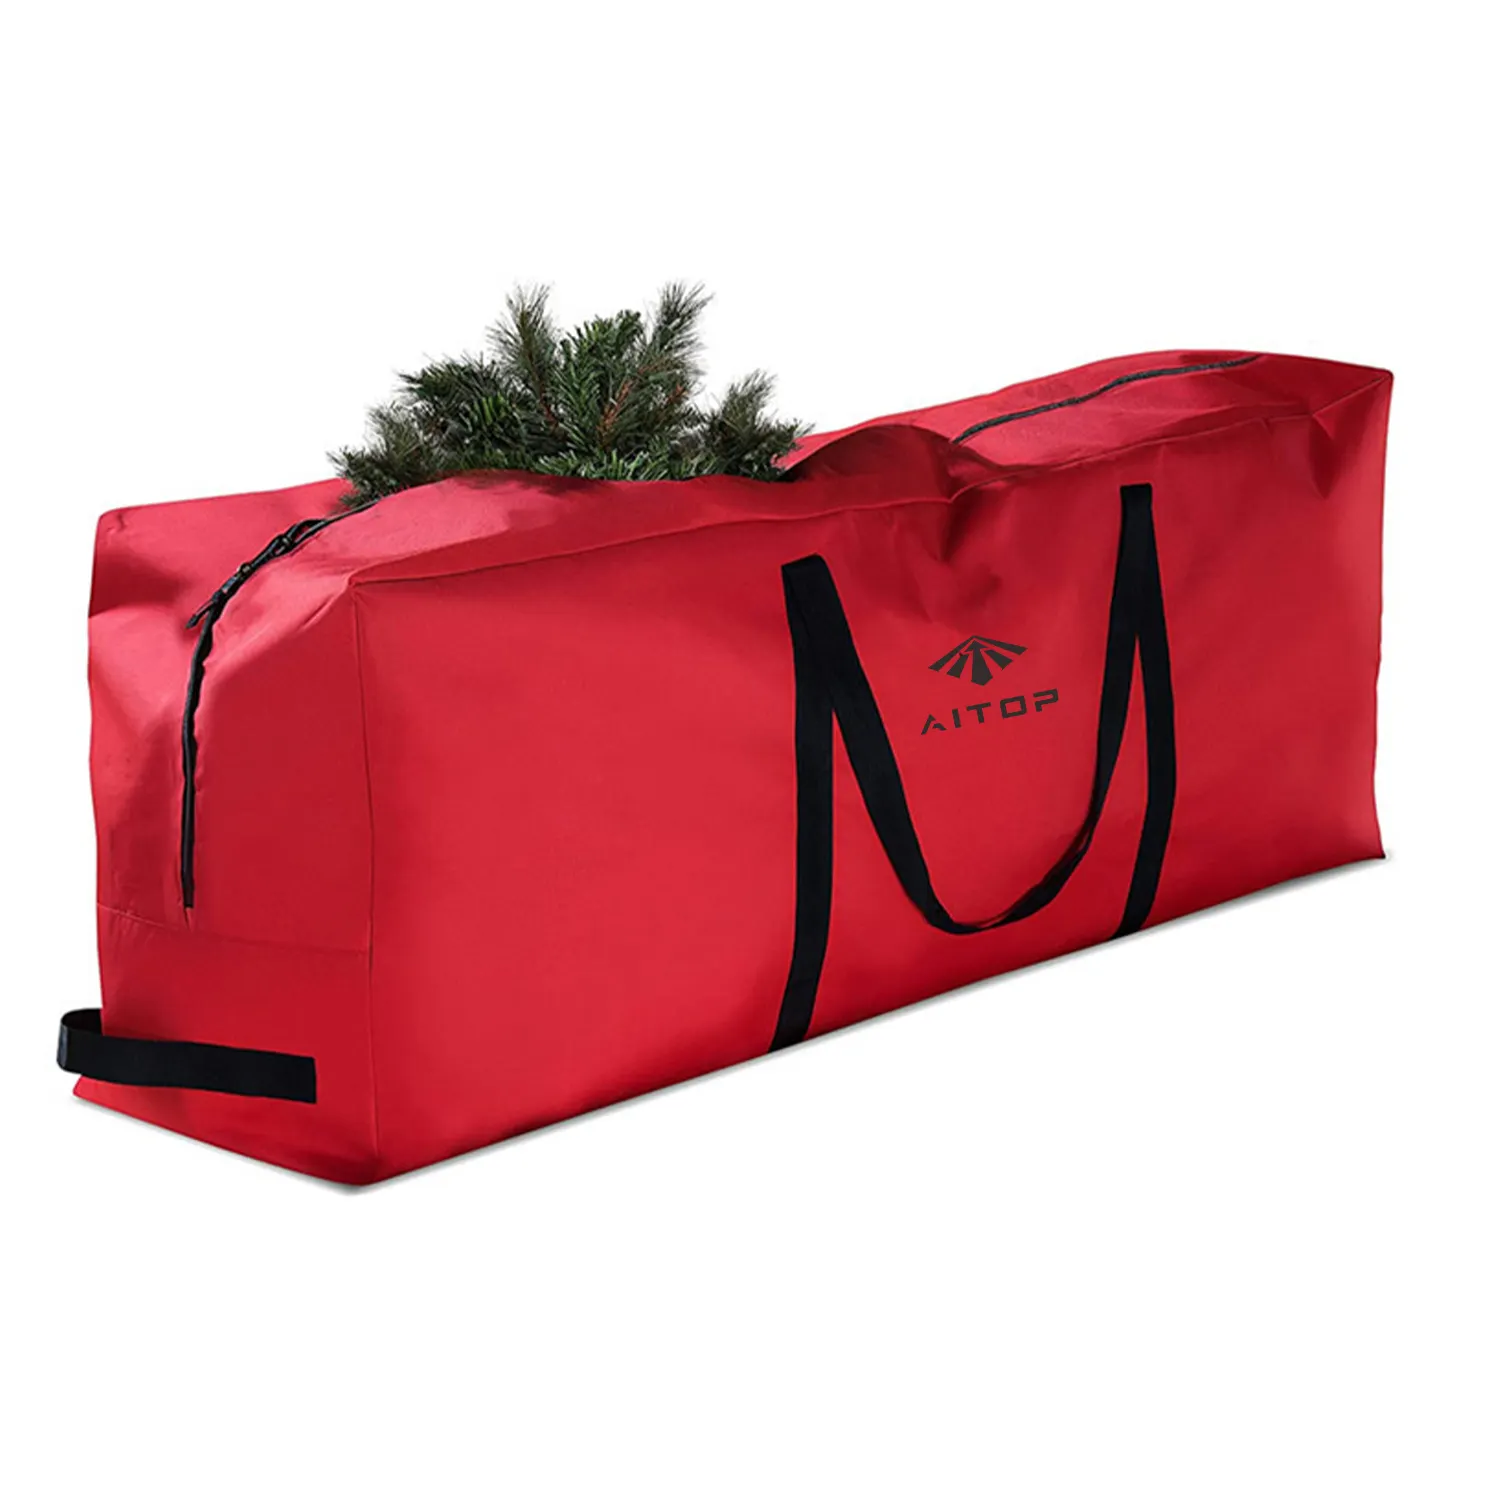 Portable Collapsible Gift Event Party Decoration Storage Bag Outdoor Xmas Patio Nylon Christmas Tree Storage Bag